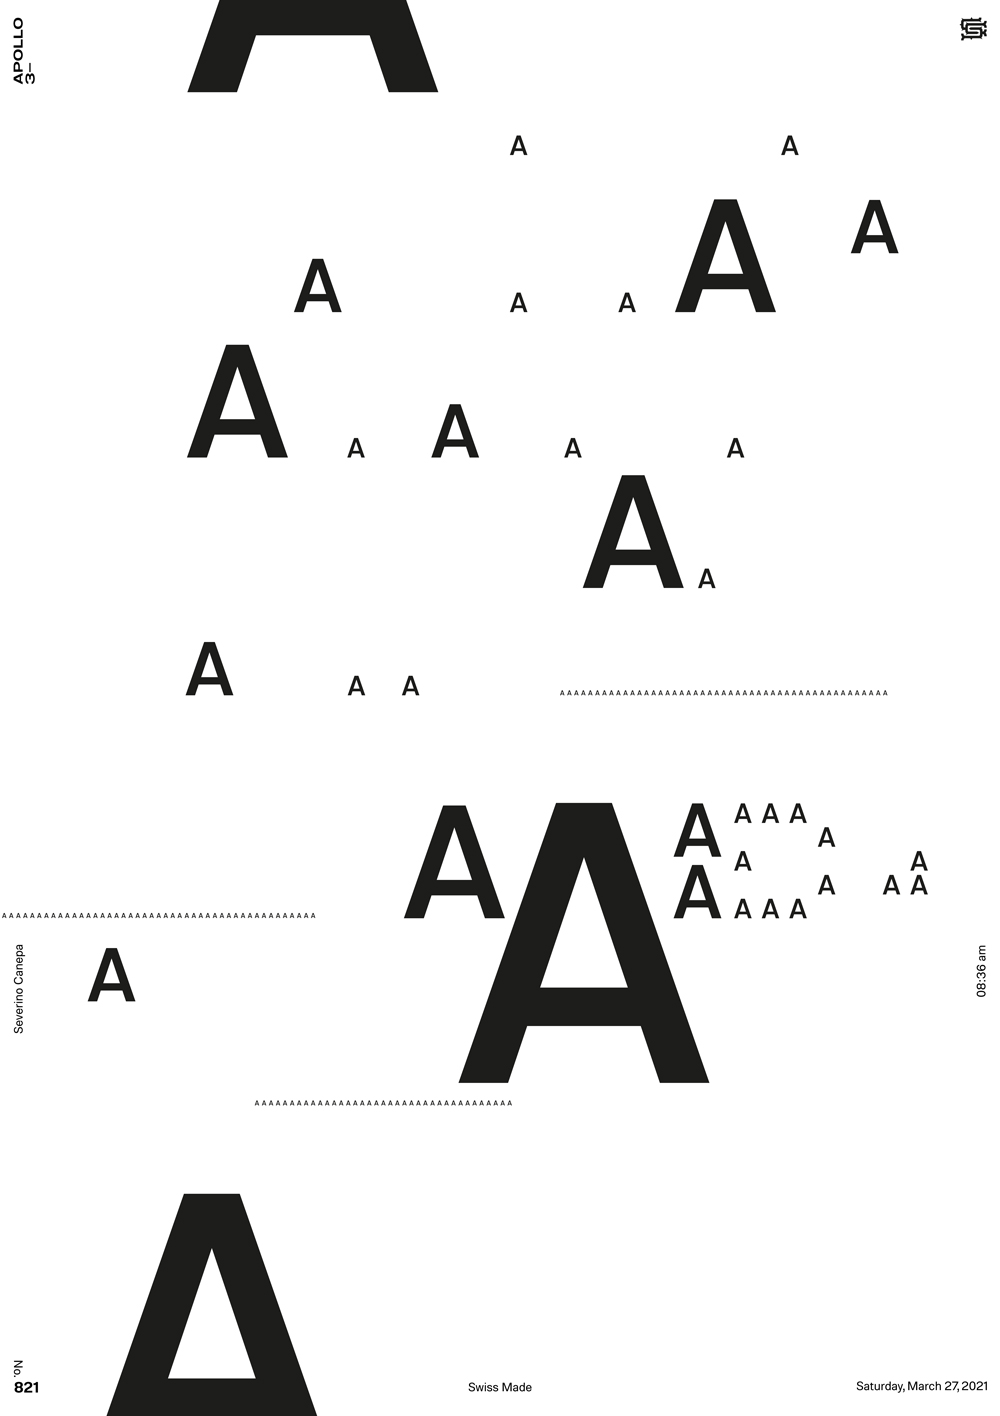 Typographic composition only realized with A letter